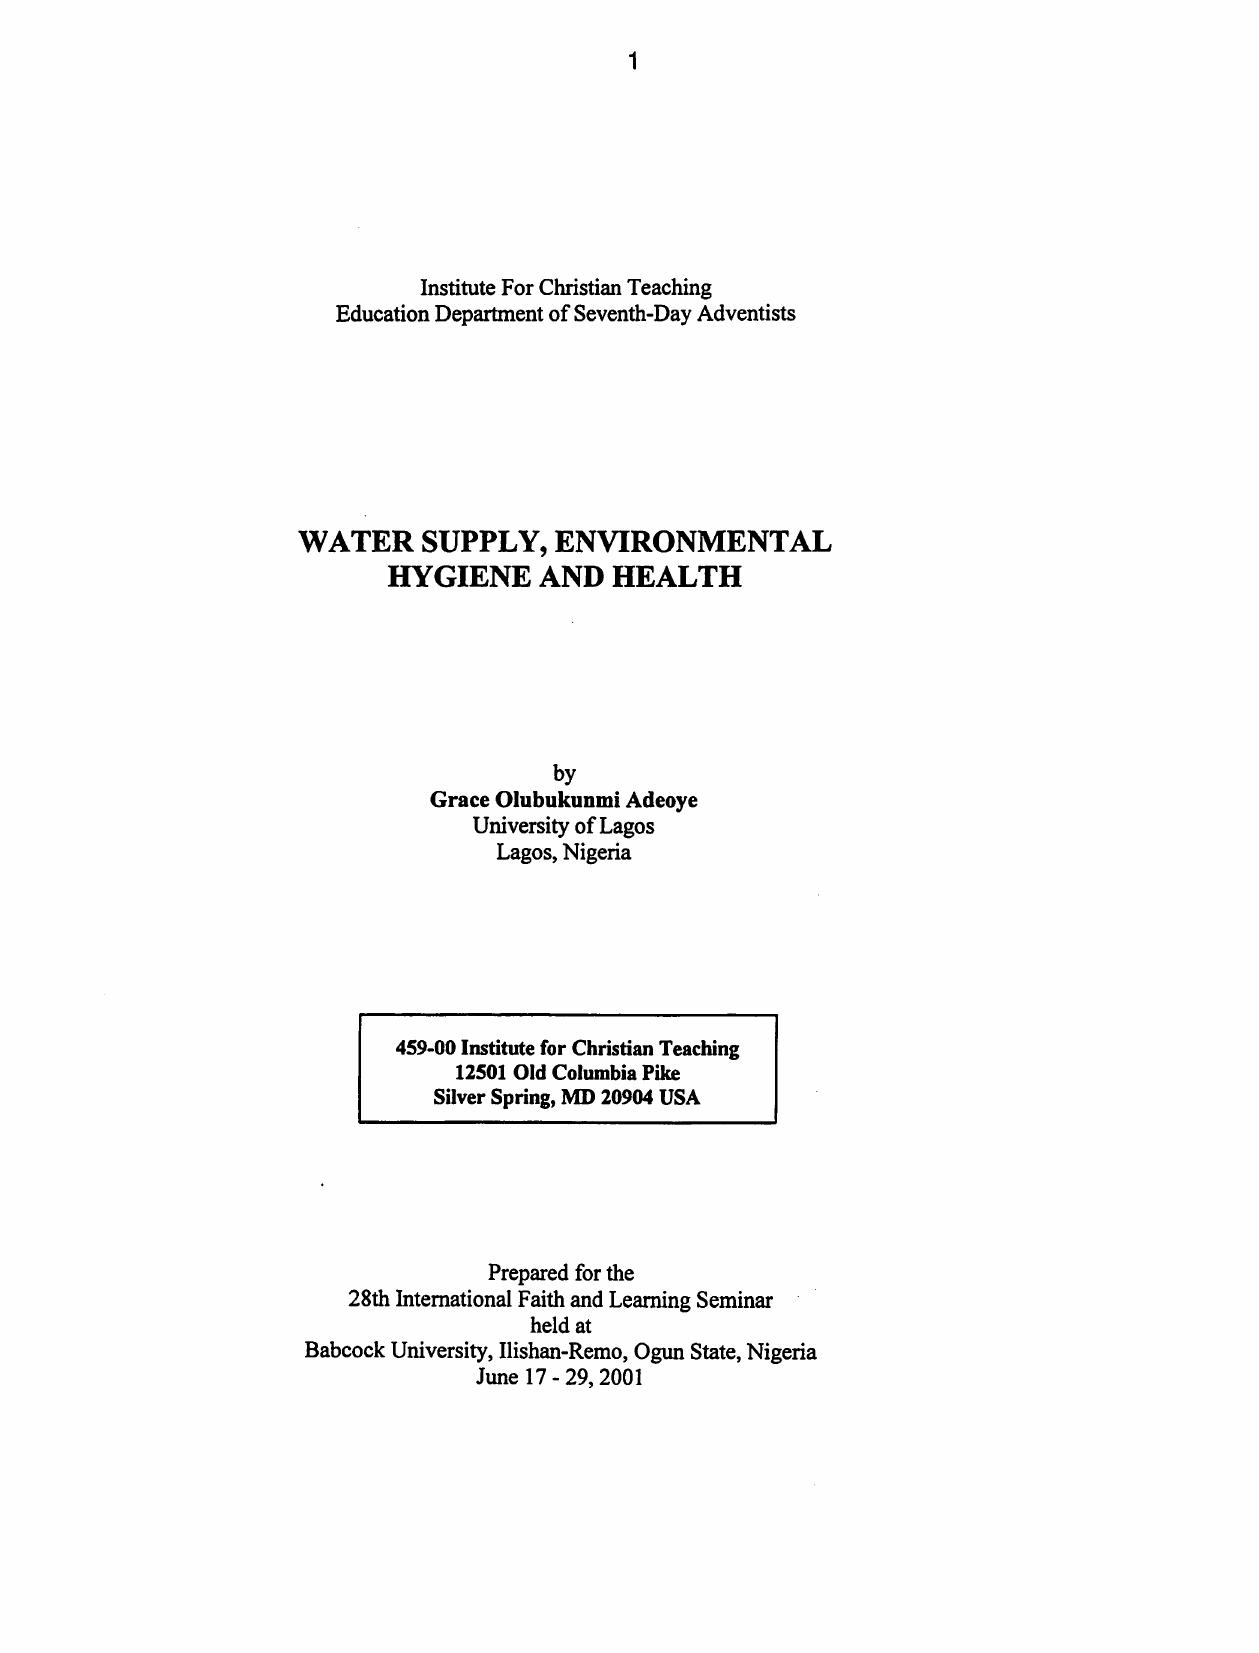 Water supply, Environmental Hygiene and Health 2001